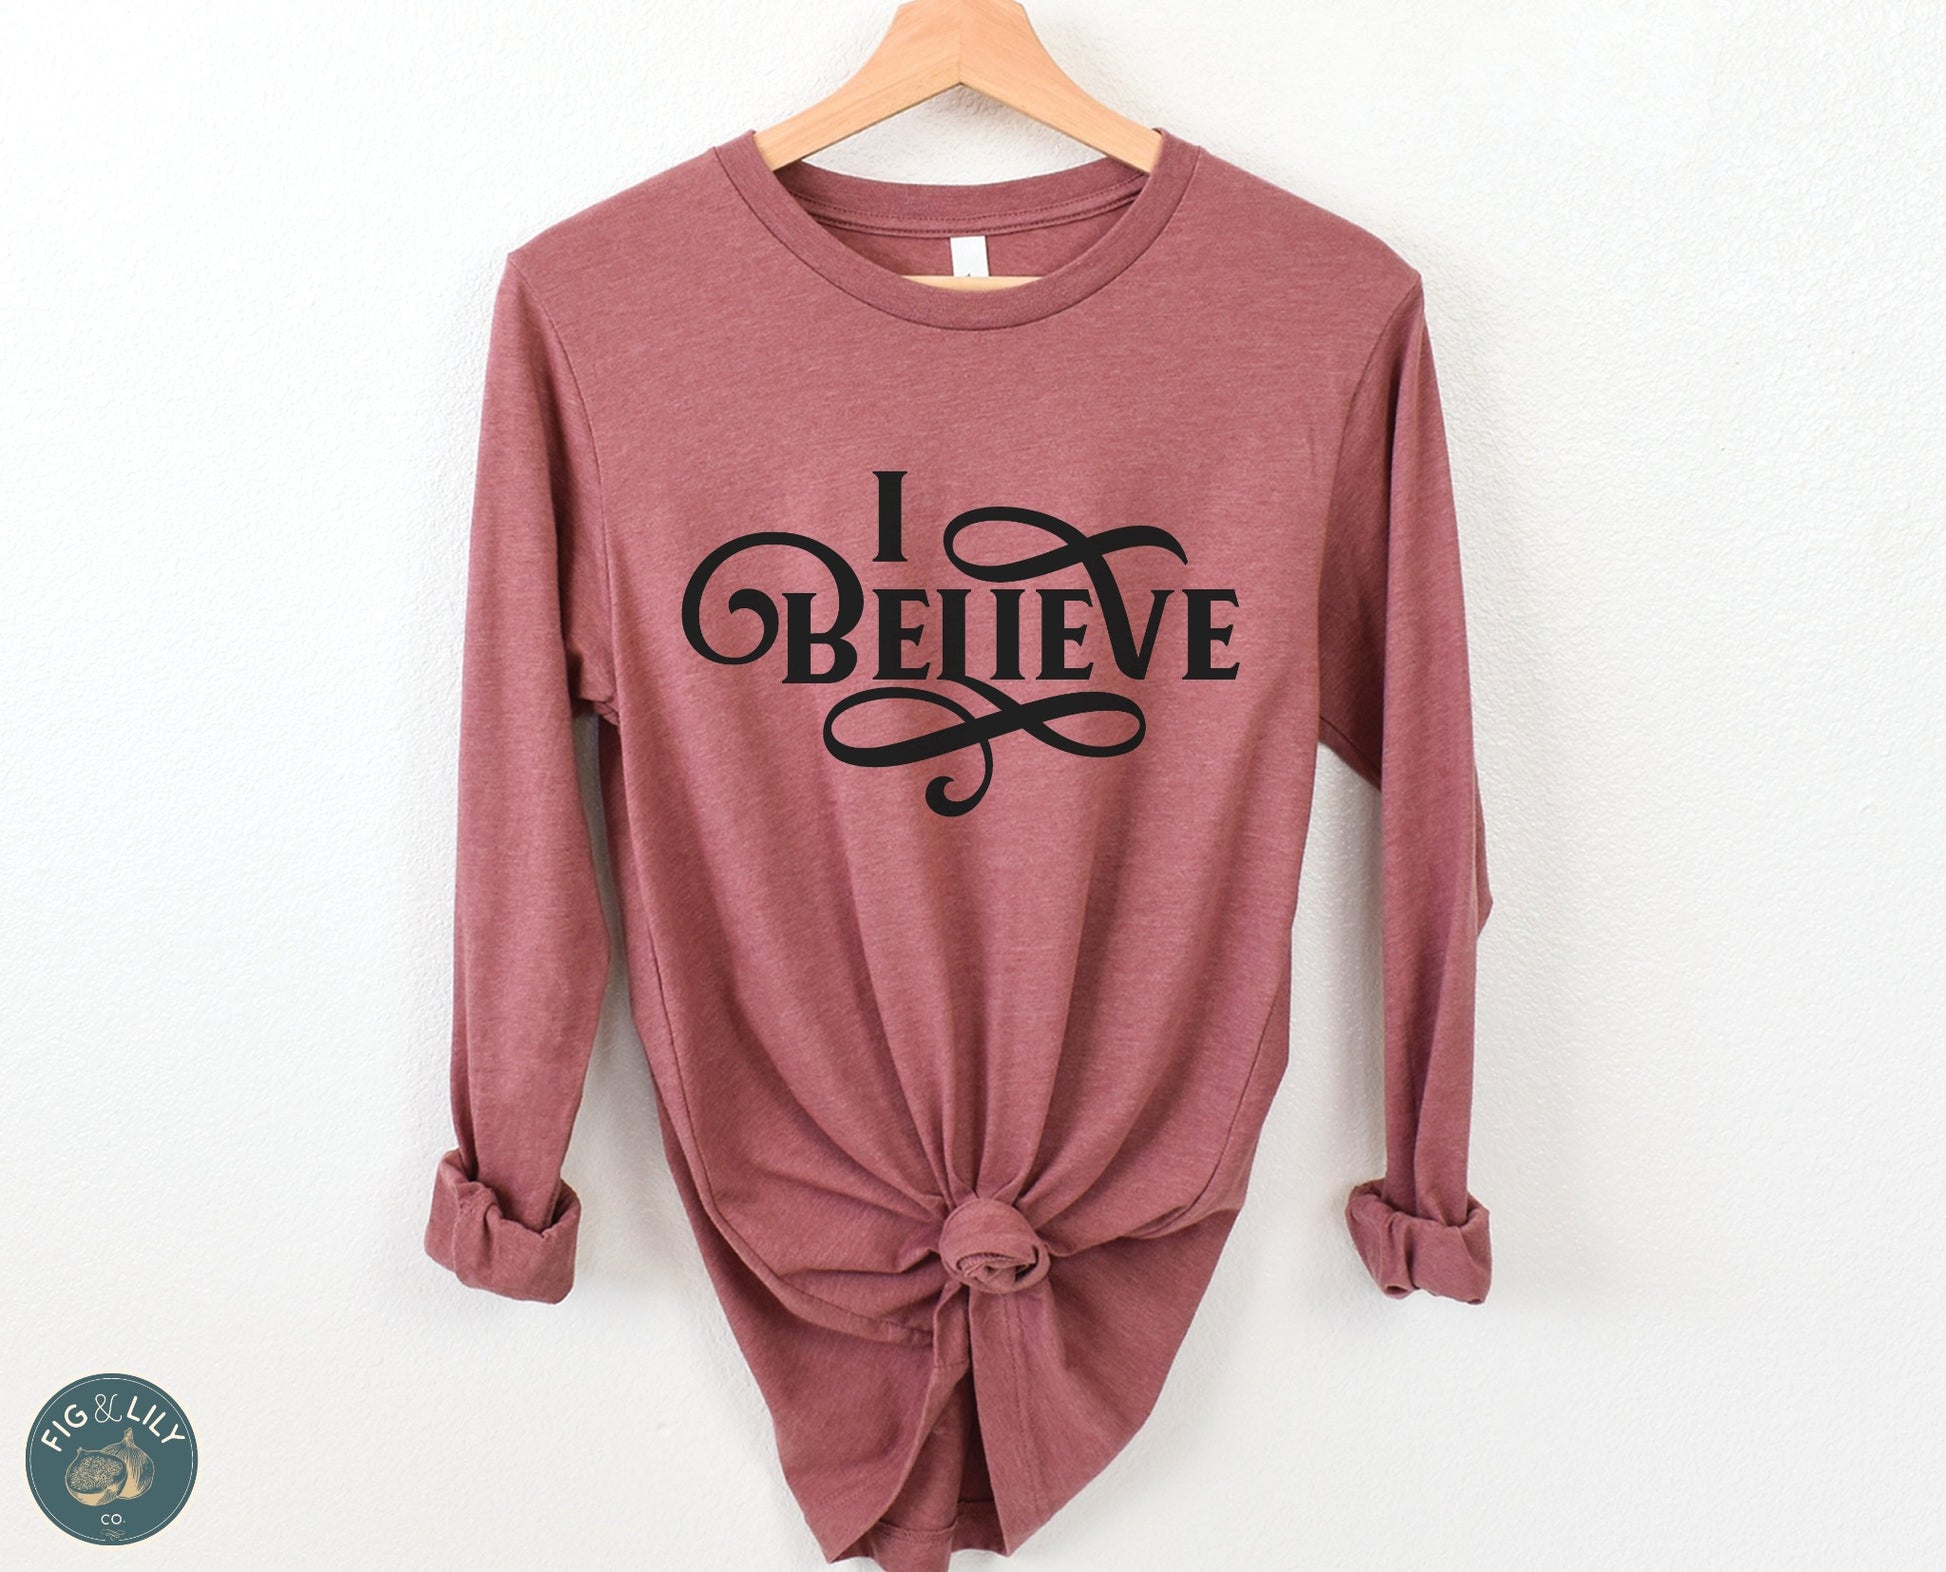 I Believe Swirl Christian aesthetic faith statement design printed in black on soft heather mauve dusty rose long sleeve tee for women